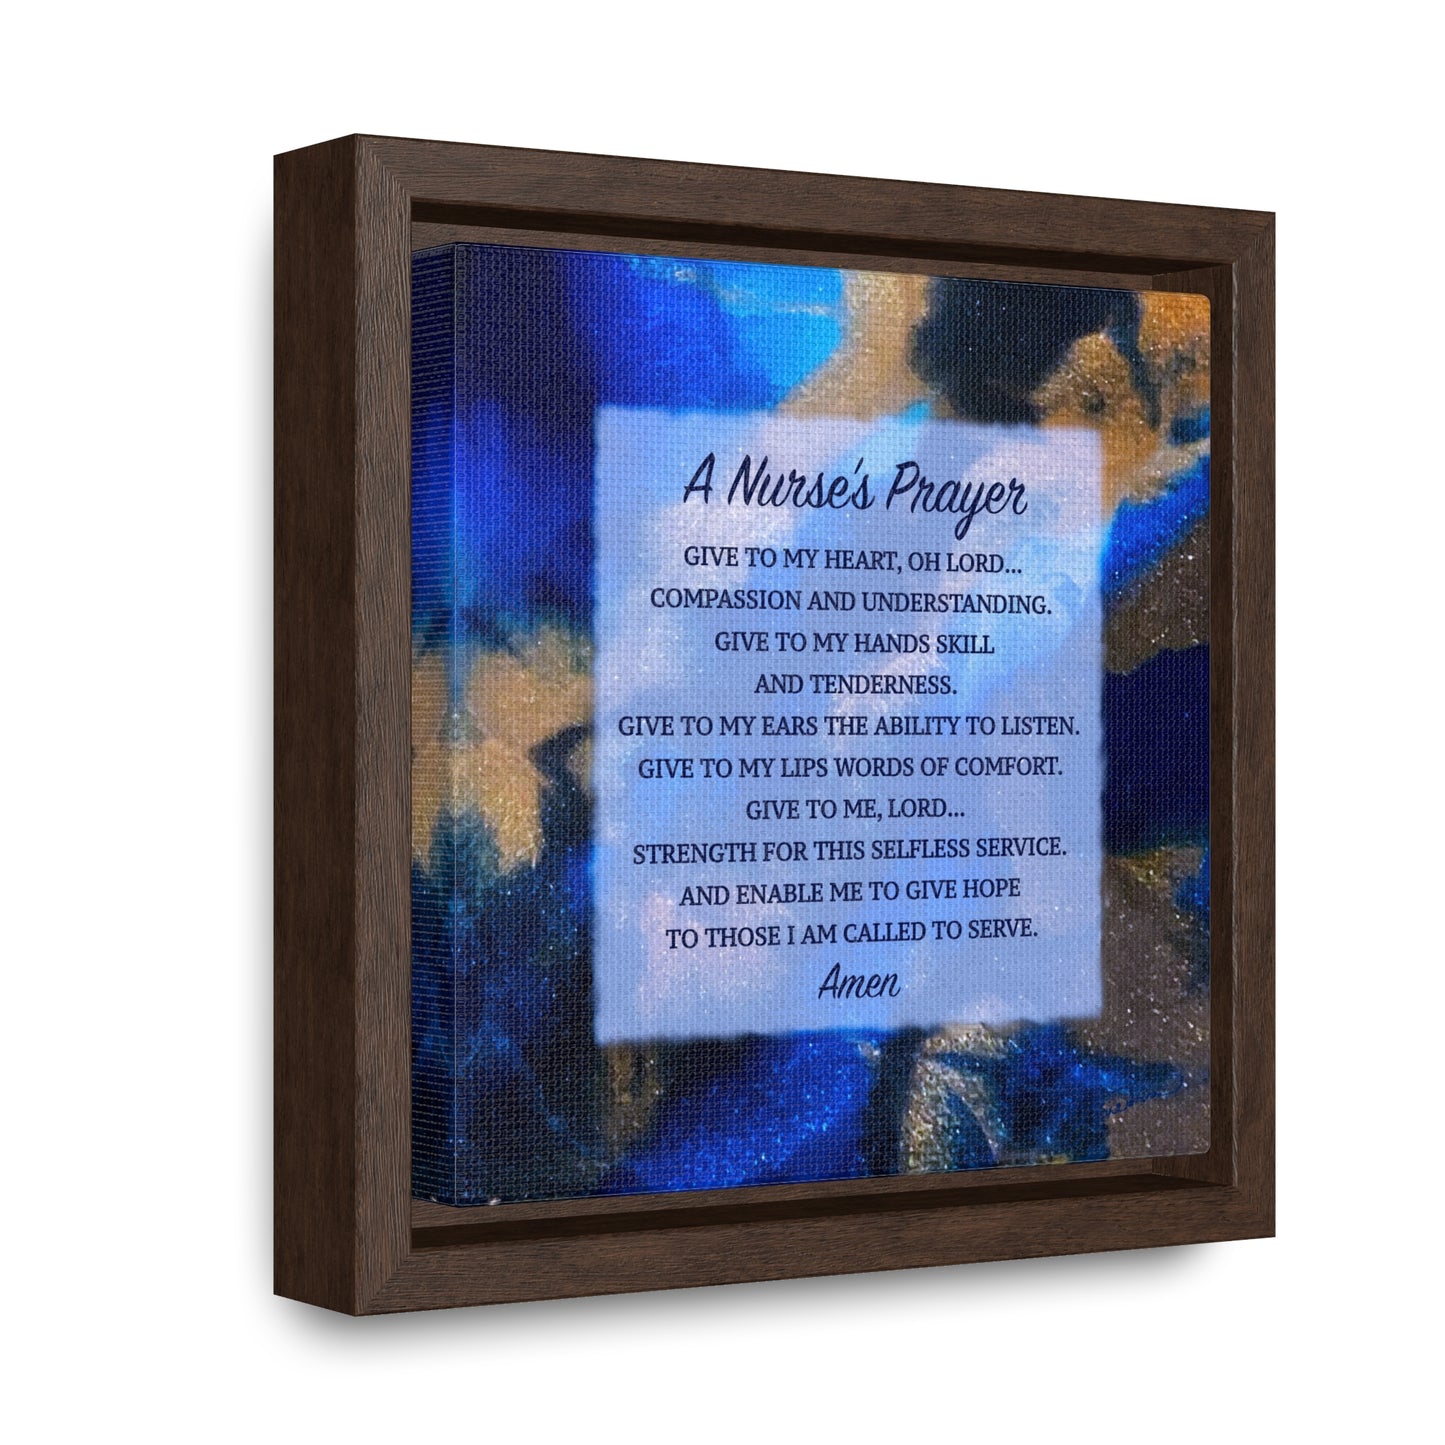 A Nurse's Prayer by Nicole Friedman Gallery Wrapped Canvas in Square Frame